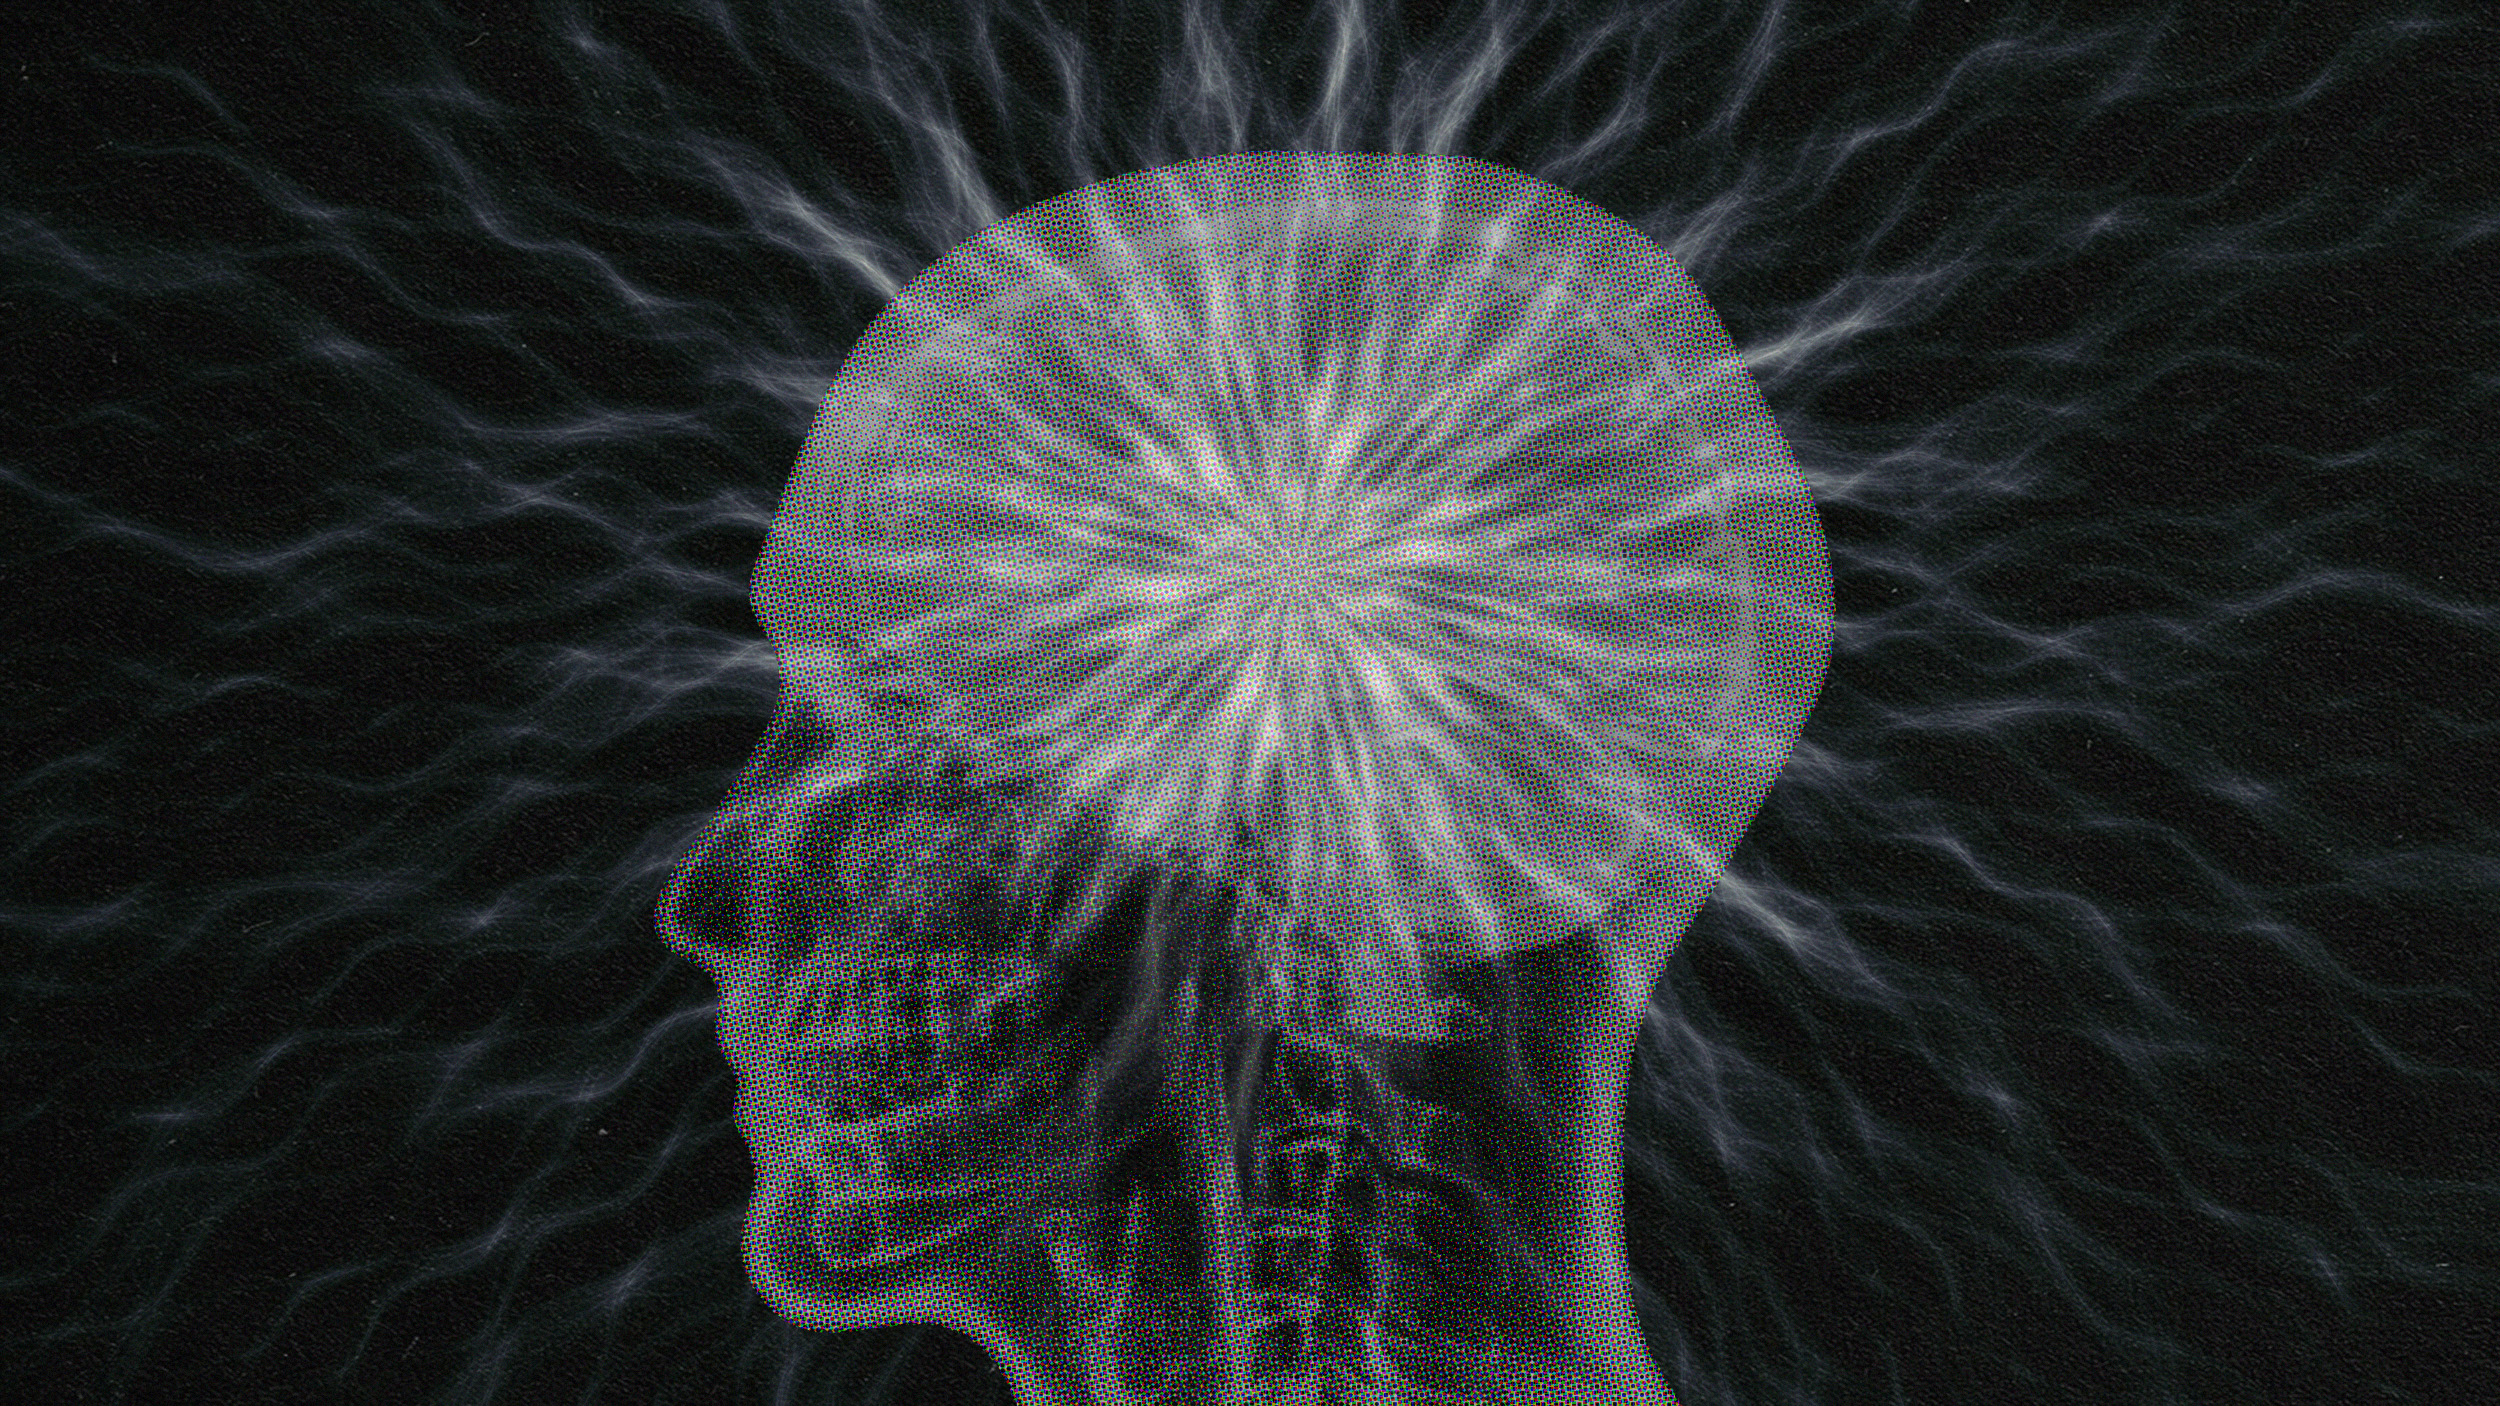 X-ray style image of a human head with brain highlighted by luminous, branching electric currents made of particles against a dark background.